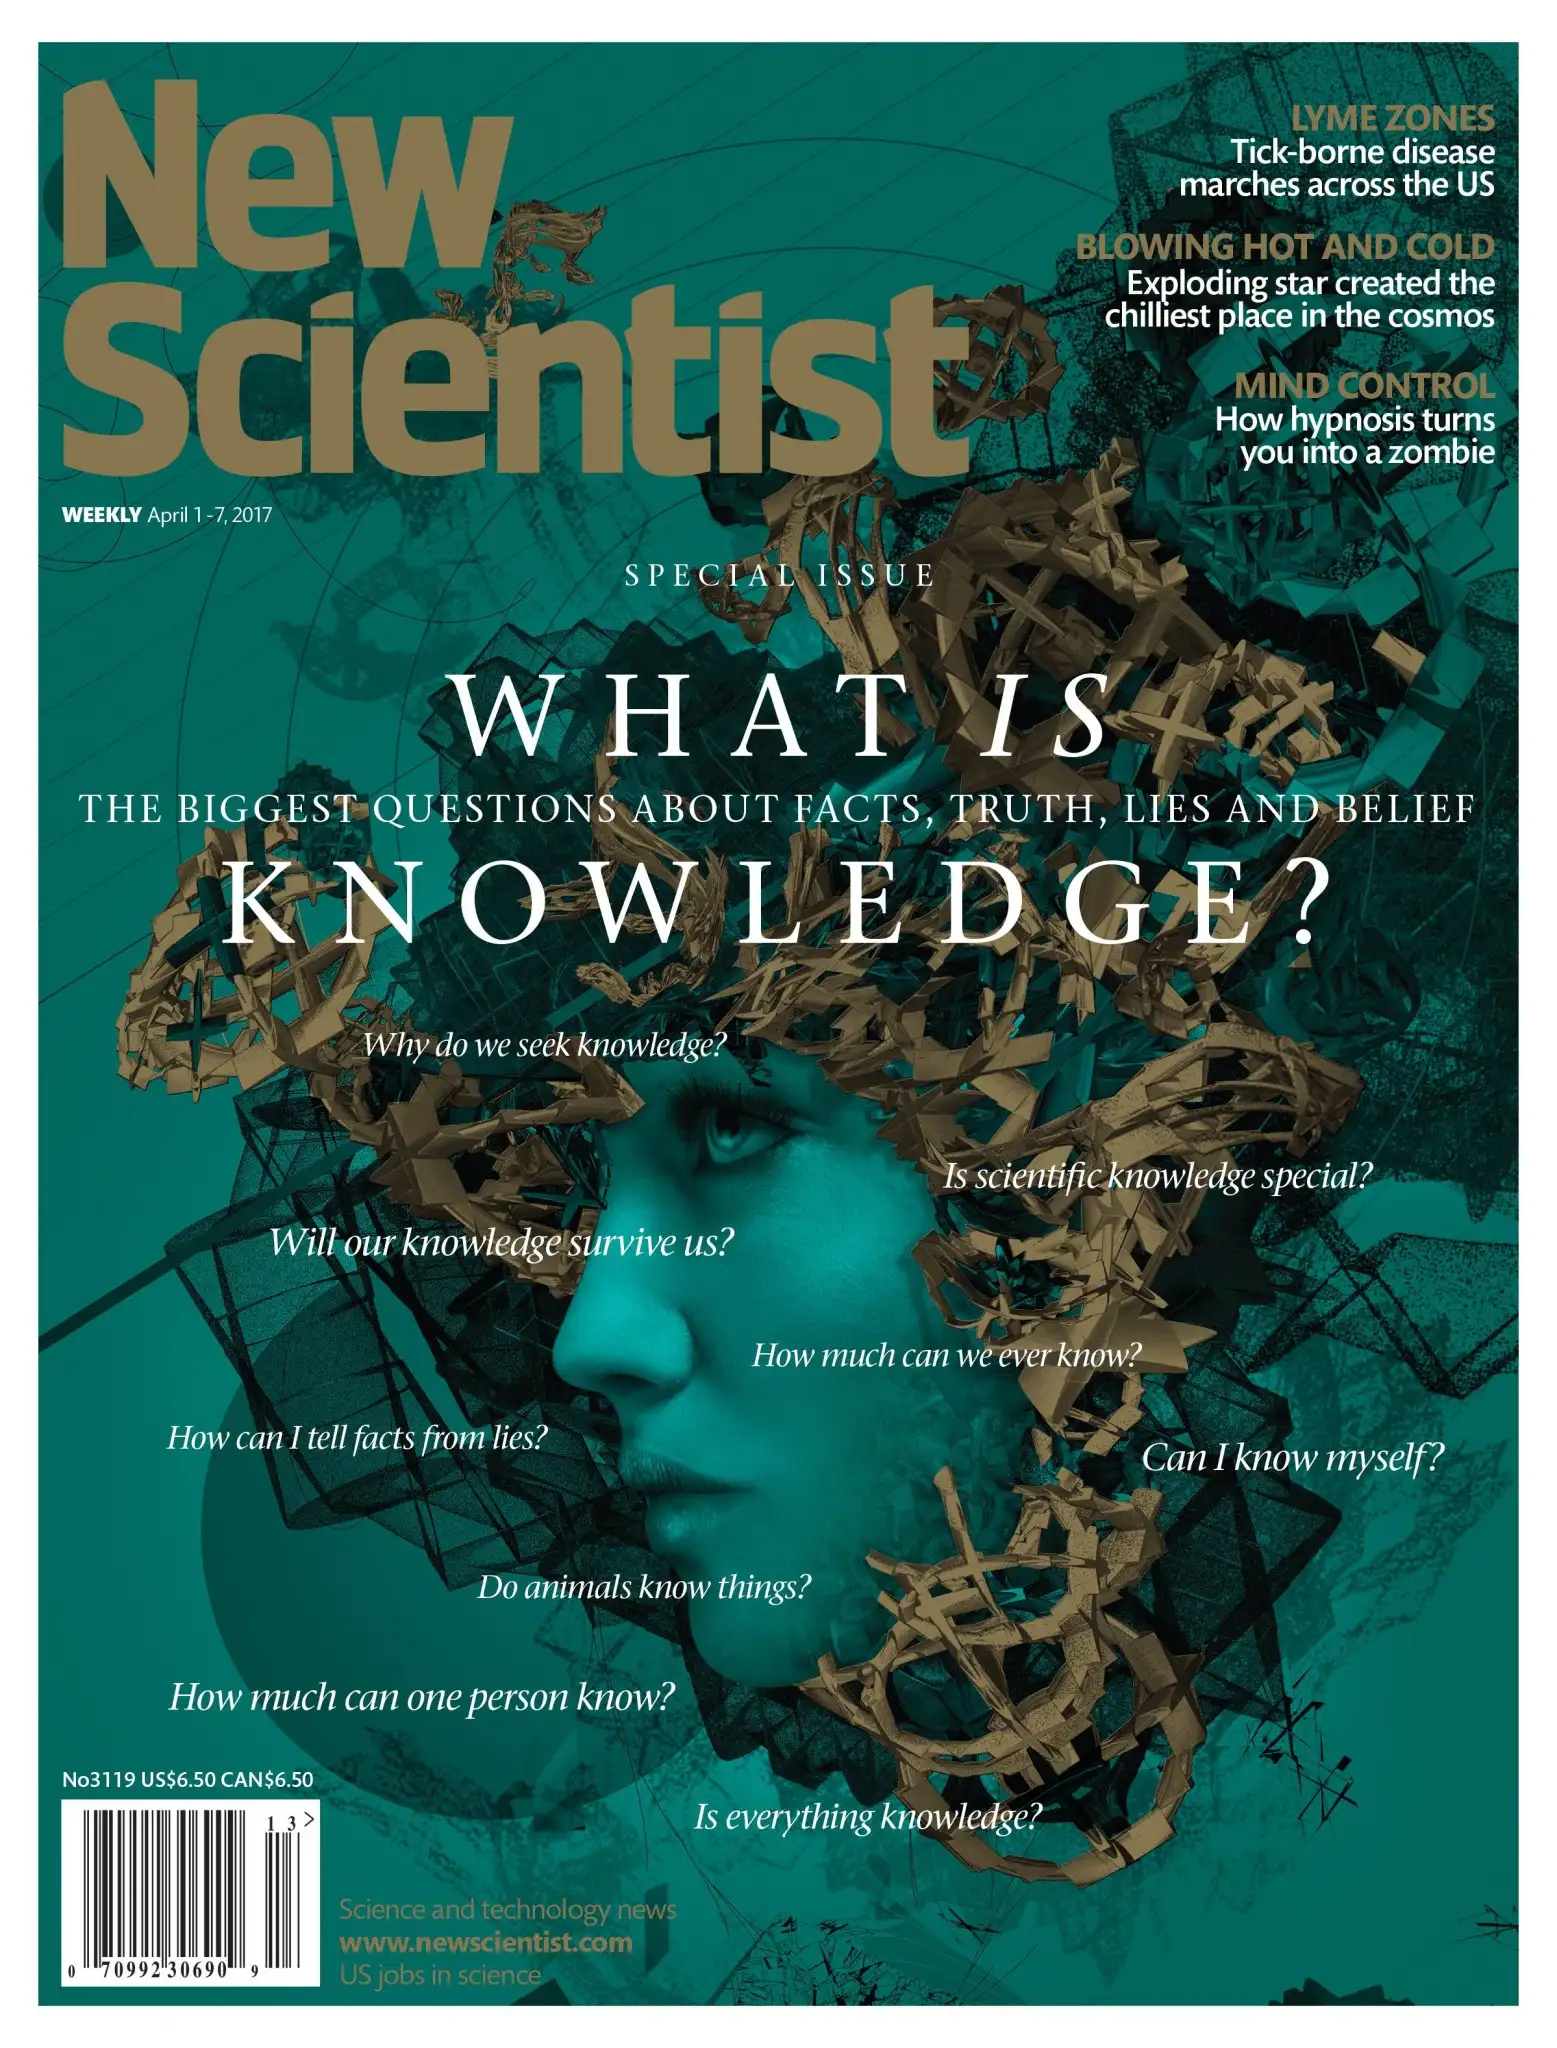 New Scientist Magazine, April 1, 2017 Cover. Cover story is "What is knowledge"